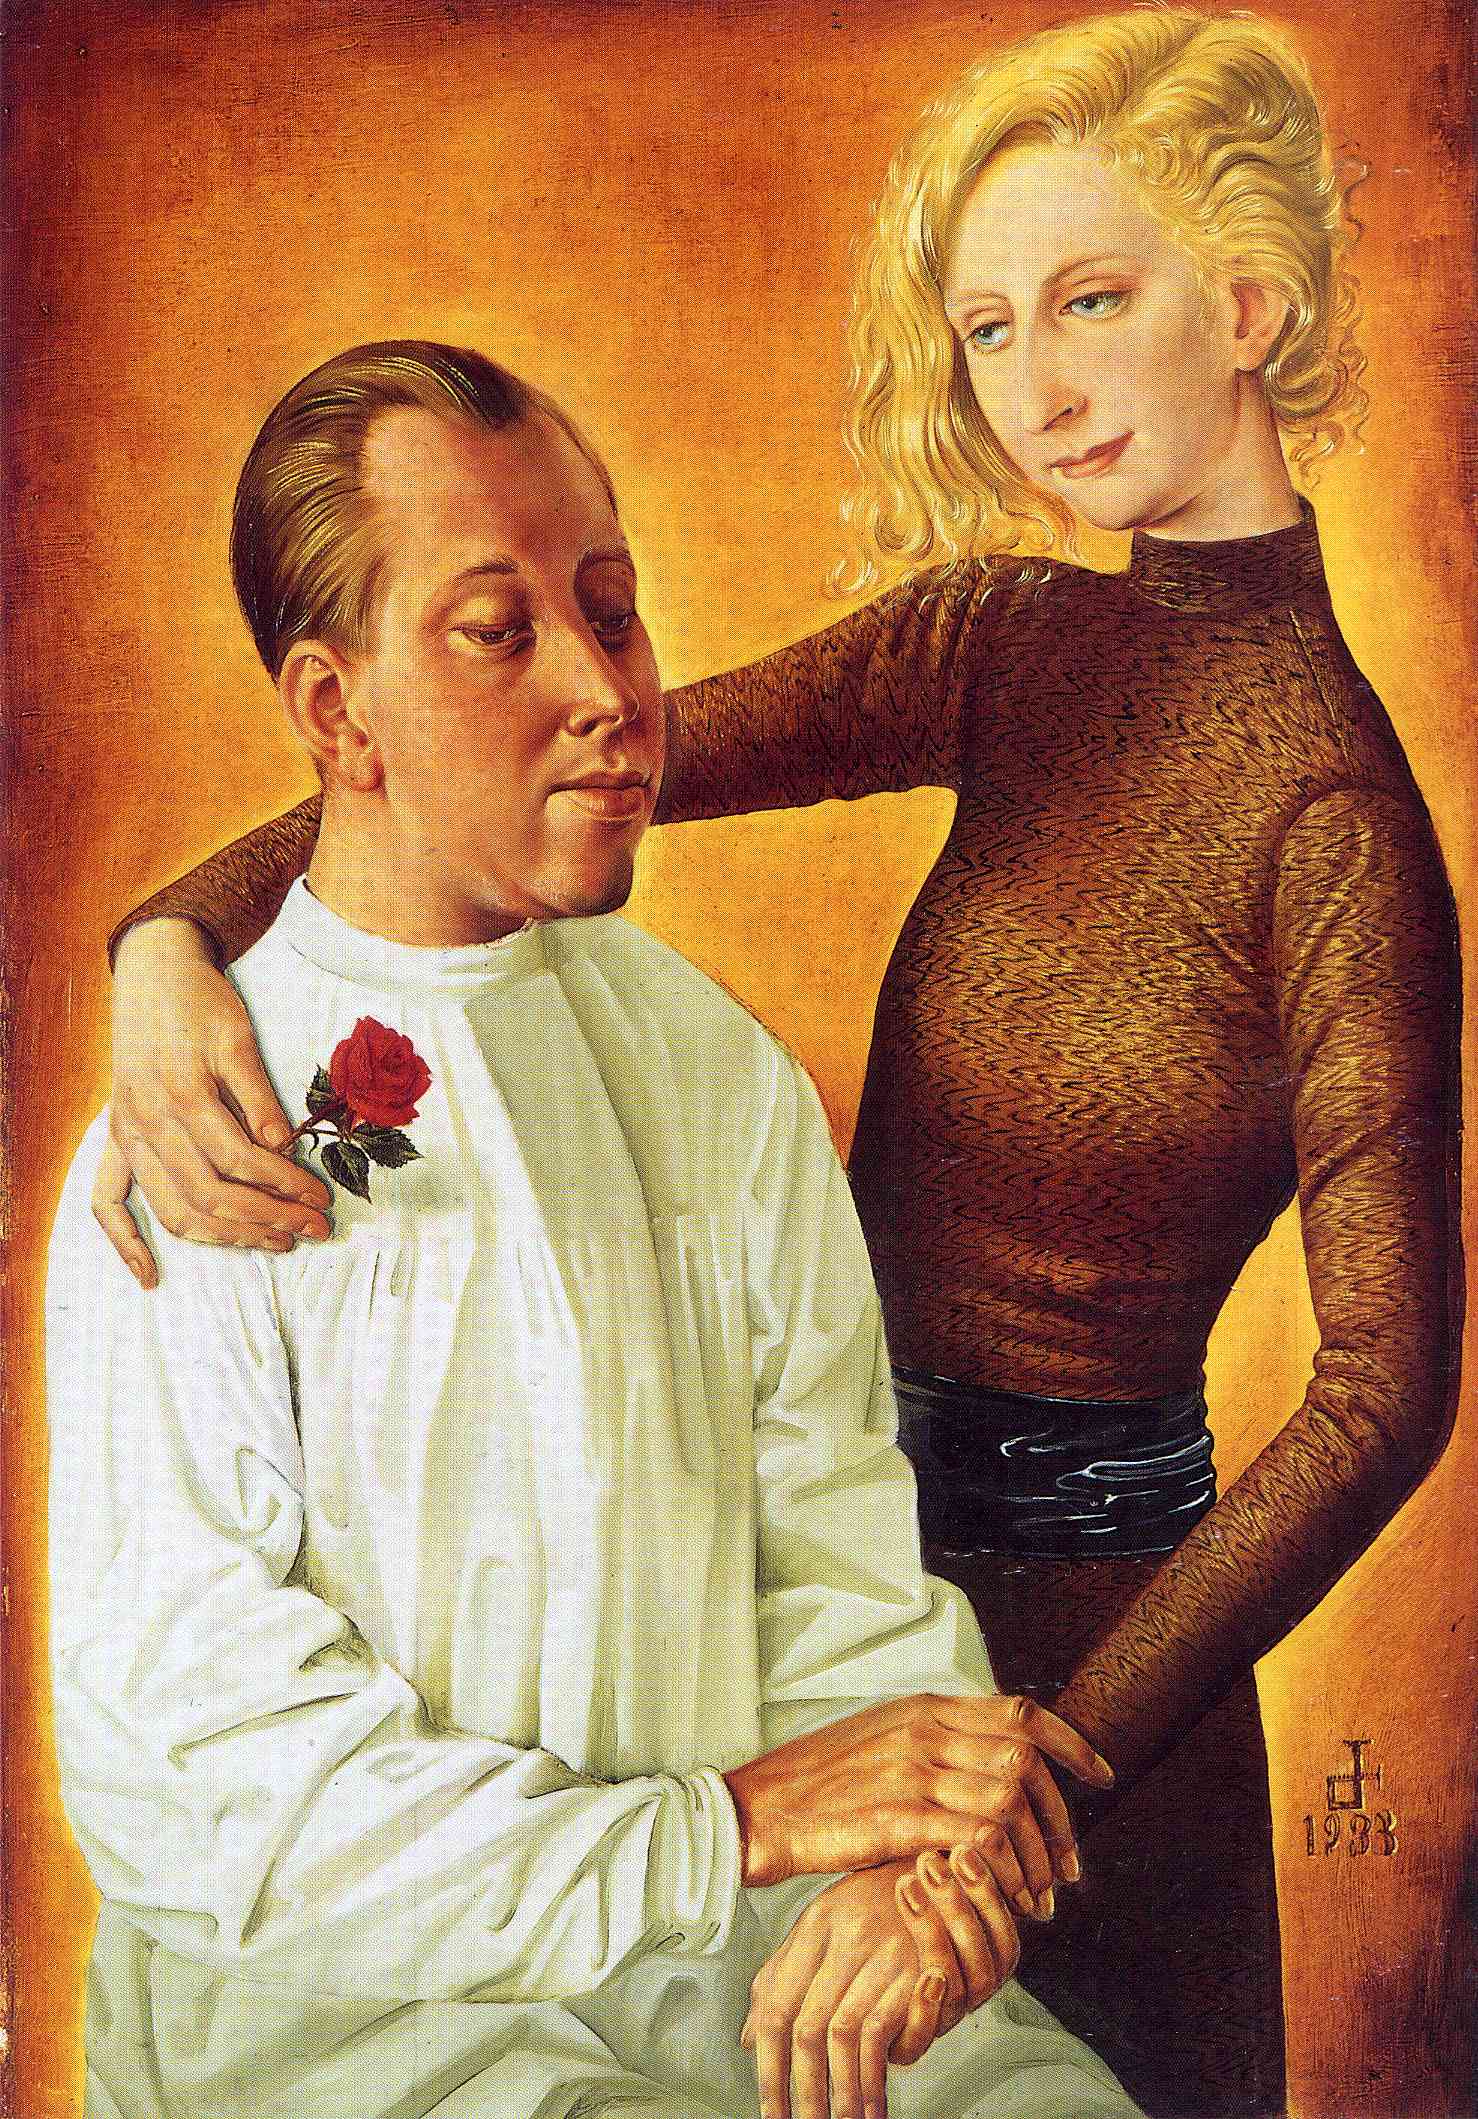 http://uploads4.wikiart.org/images/otto-dix/portrait-of-the-painter-hans-theo-richter-and-his-wife-gisela.jpg